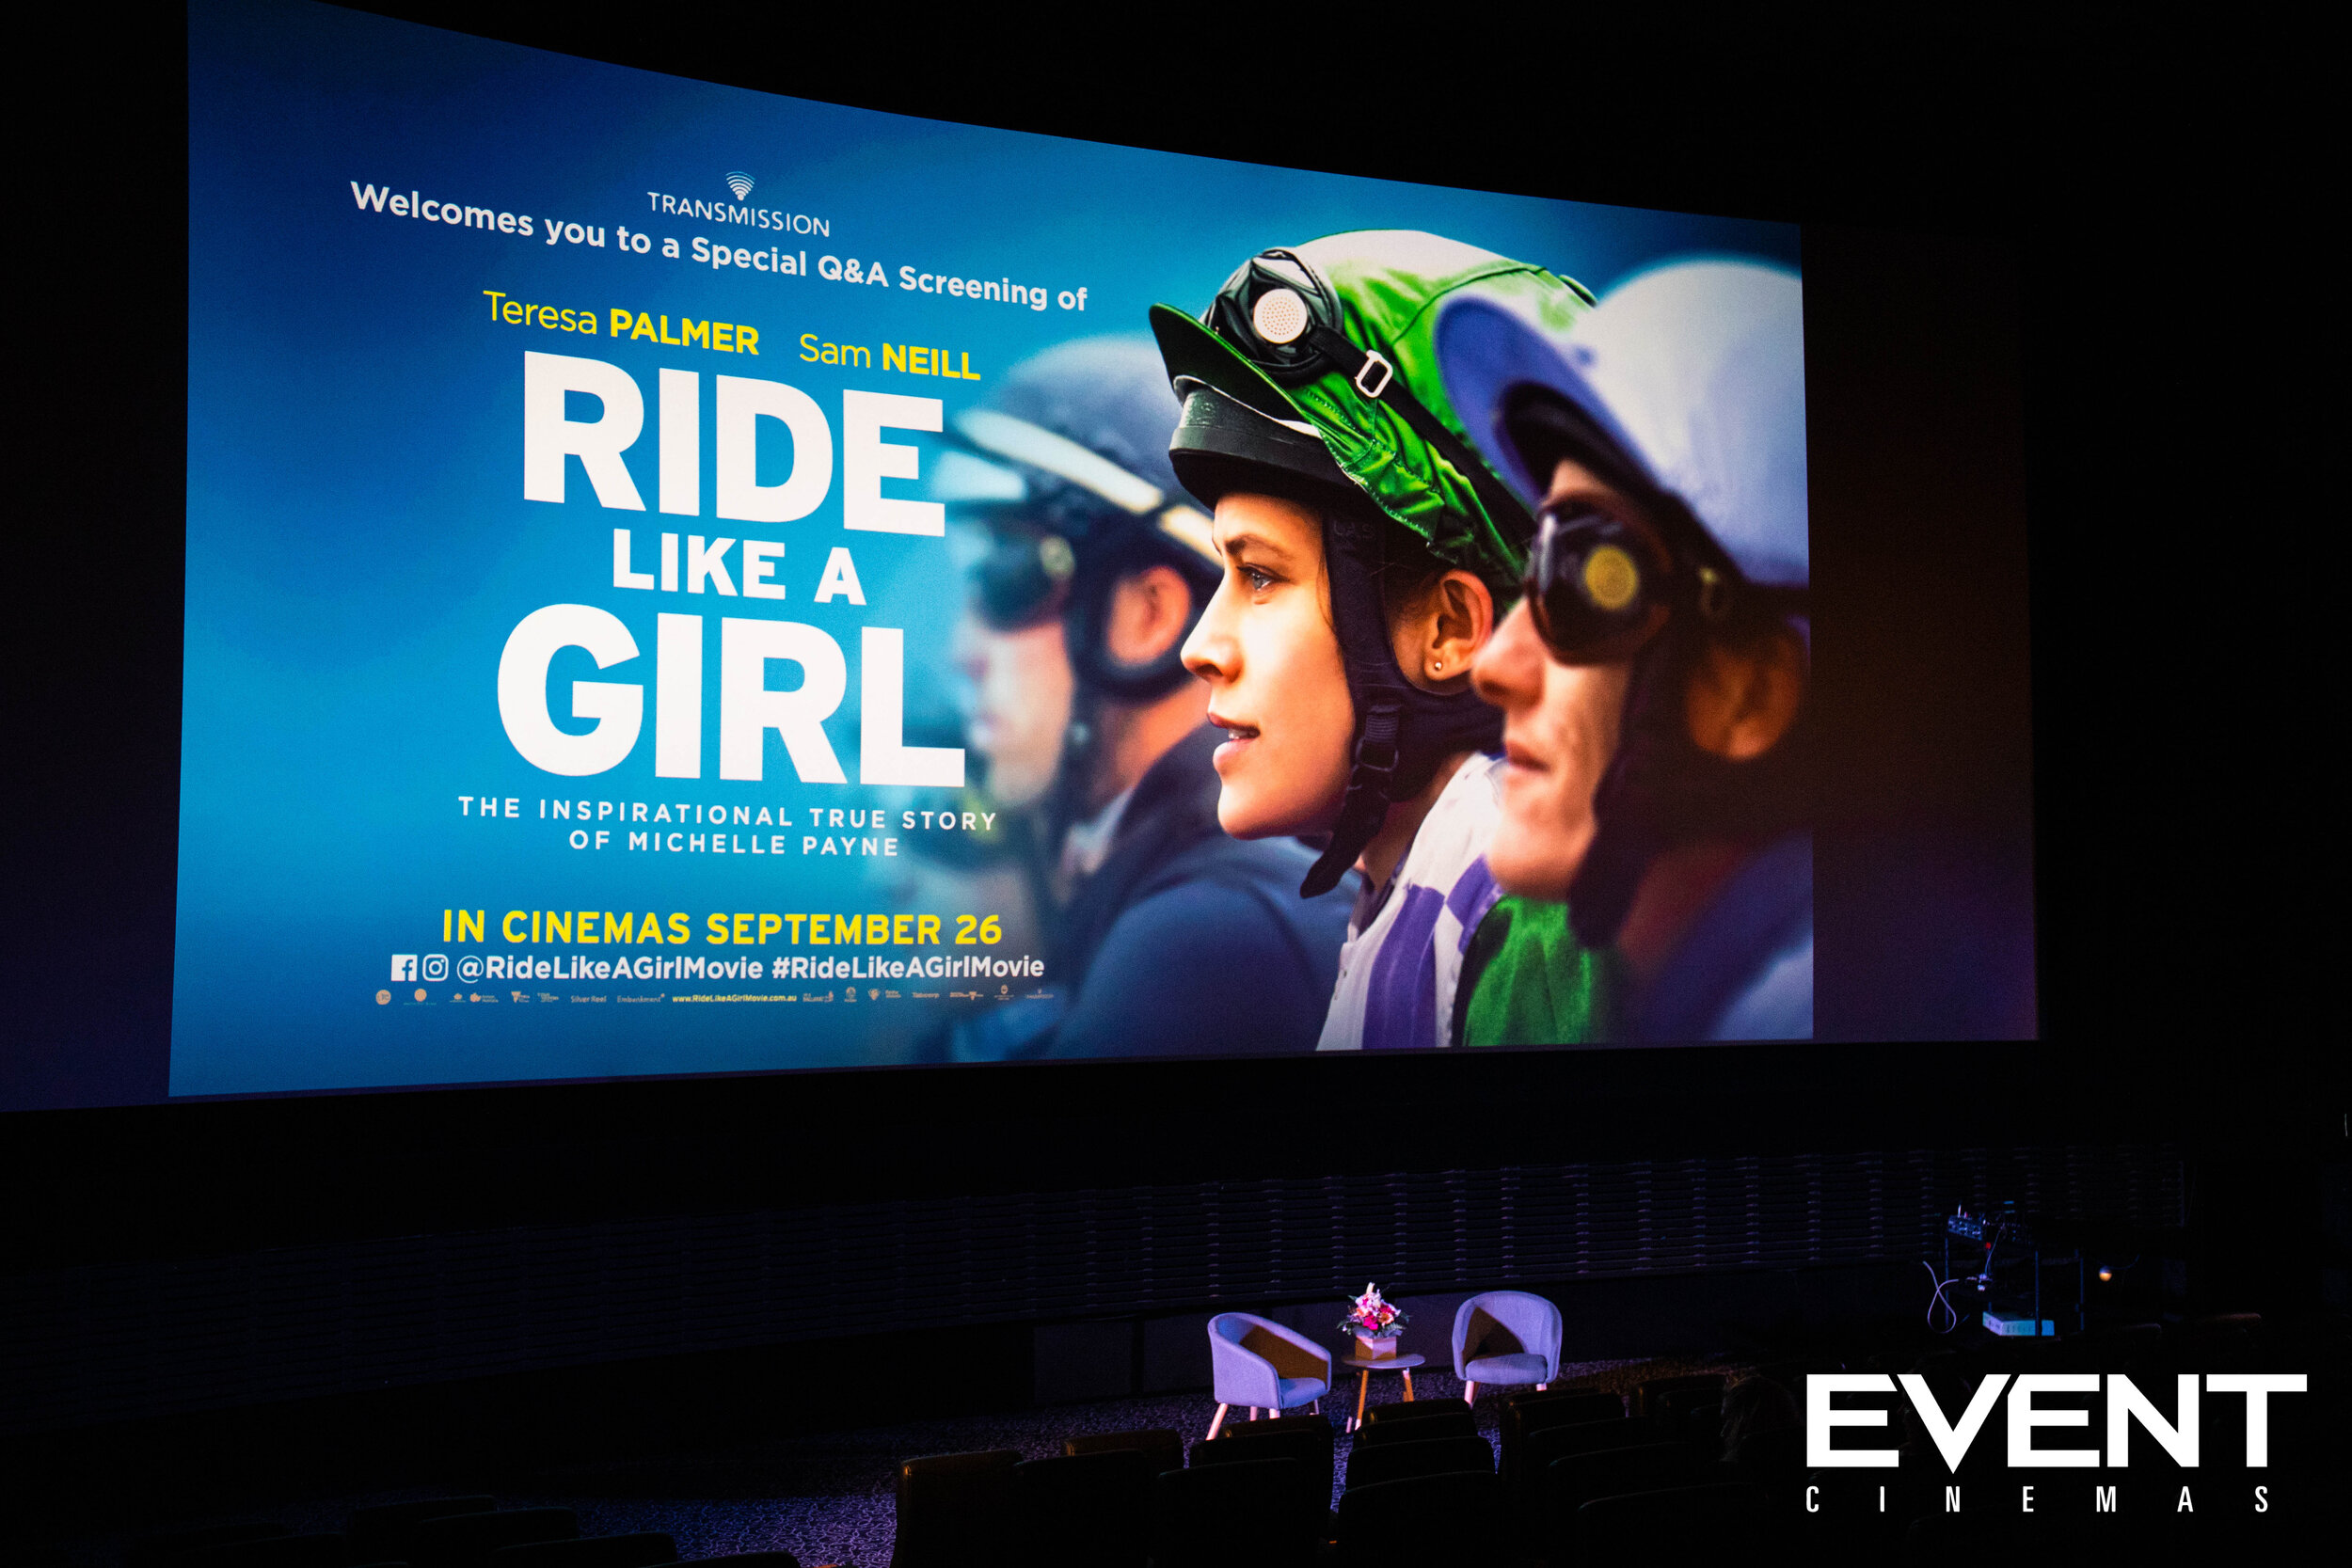 The Ride Like a girl movie poster on the big screen.